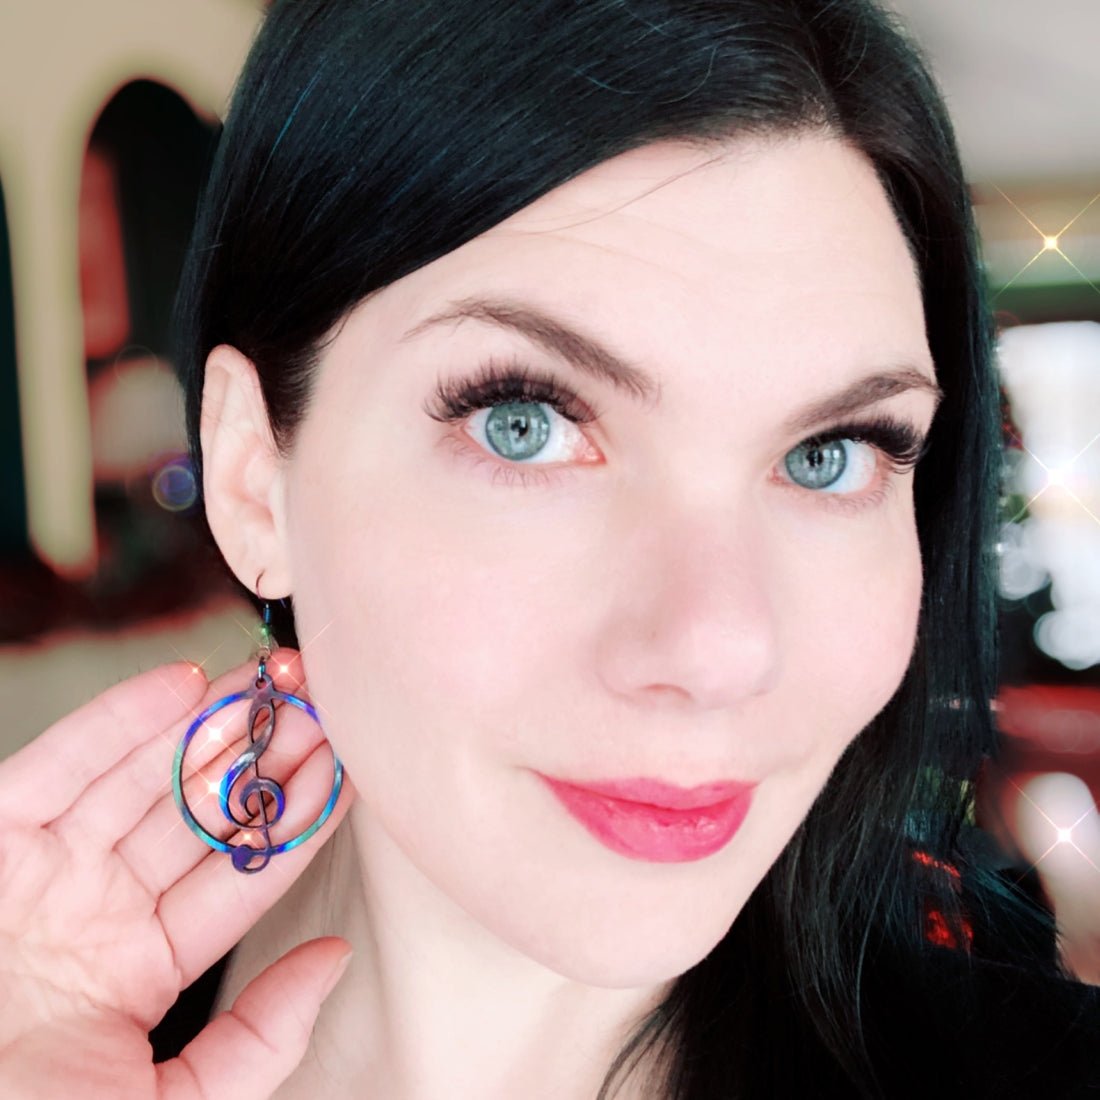 Music Lover's Treble and Bass Clef Earrings - Black Aurora - Driftless Enchantments